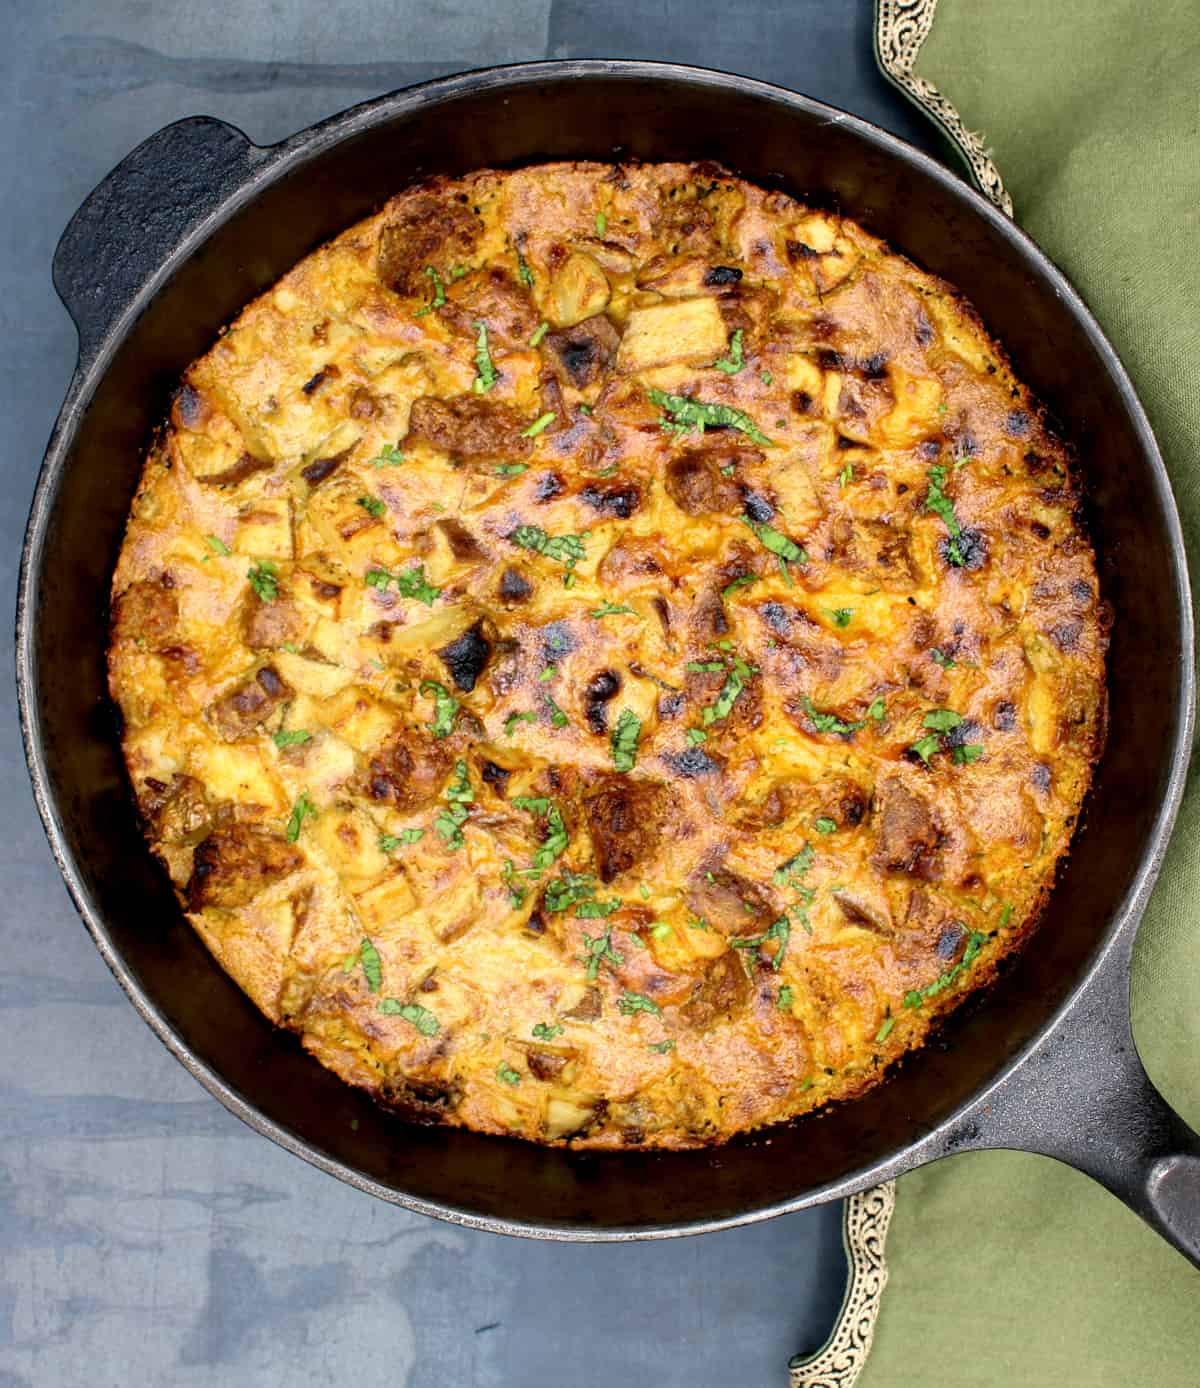 Vegan breakfast casserole baked in cast iron pan with a green napkin on the side.